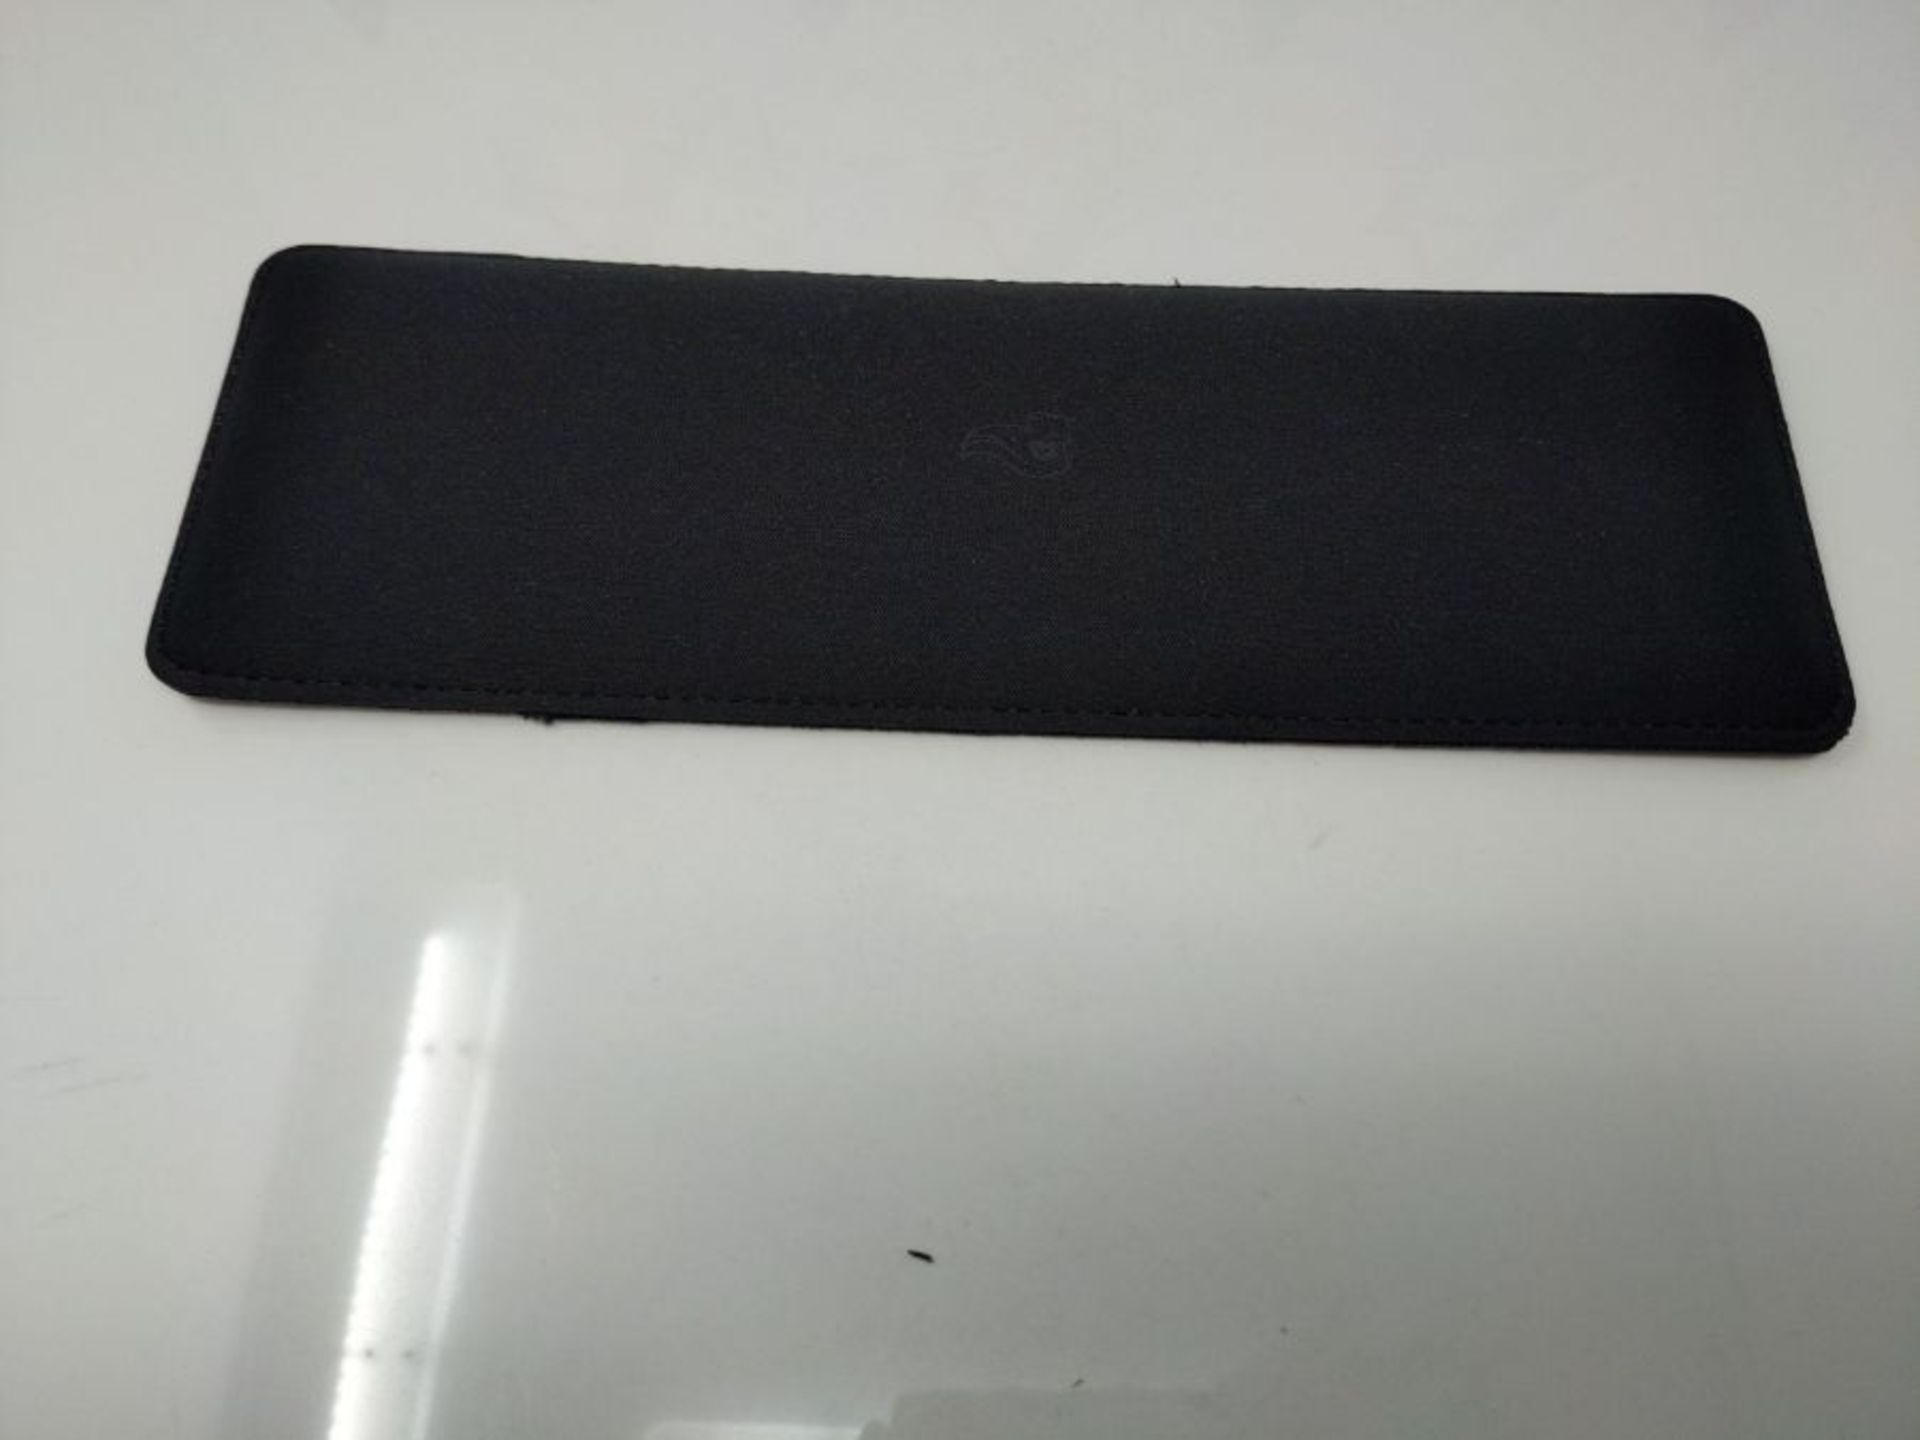 Glorious PC Gaming Race Stealth Keyboard Wrist Rest Slim - Compact, Nero - Image 2 of 2